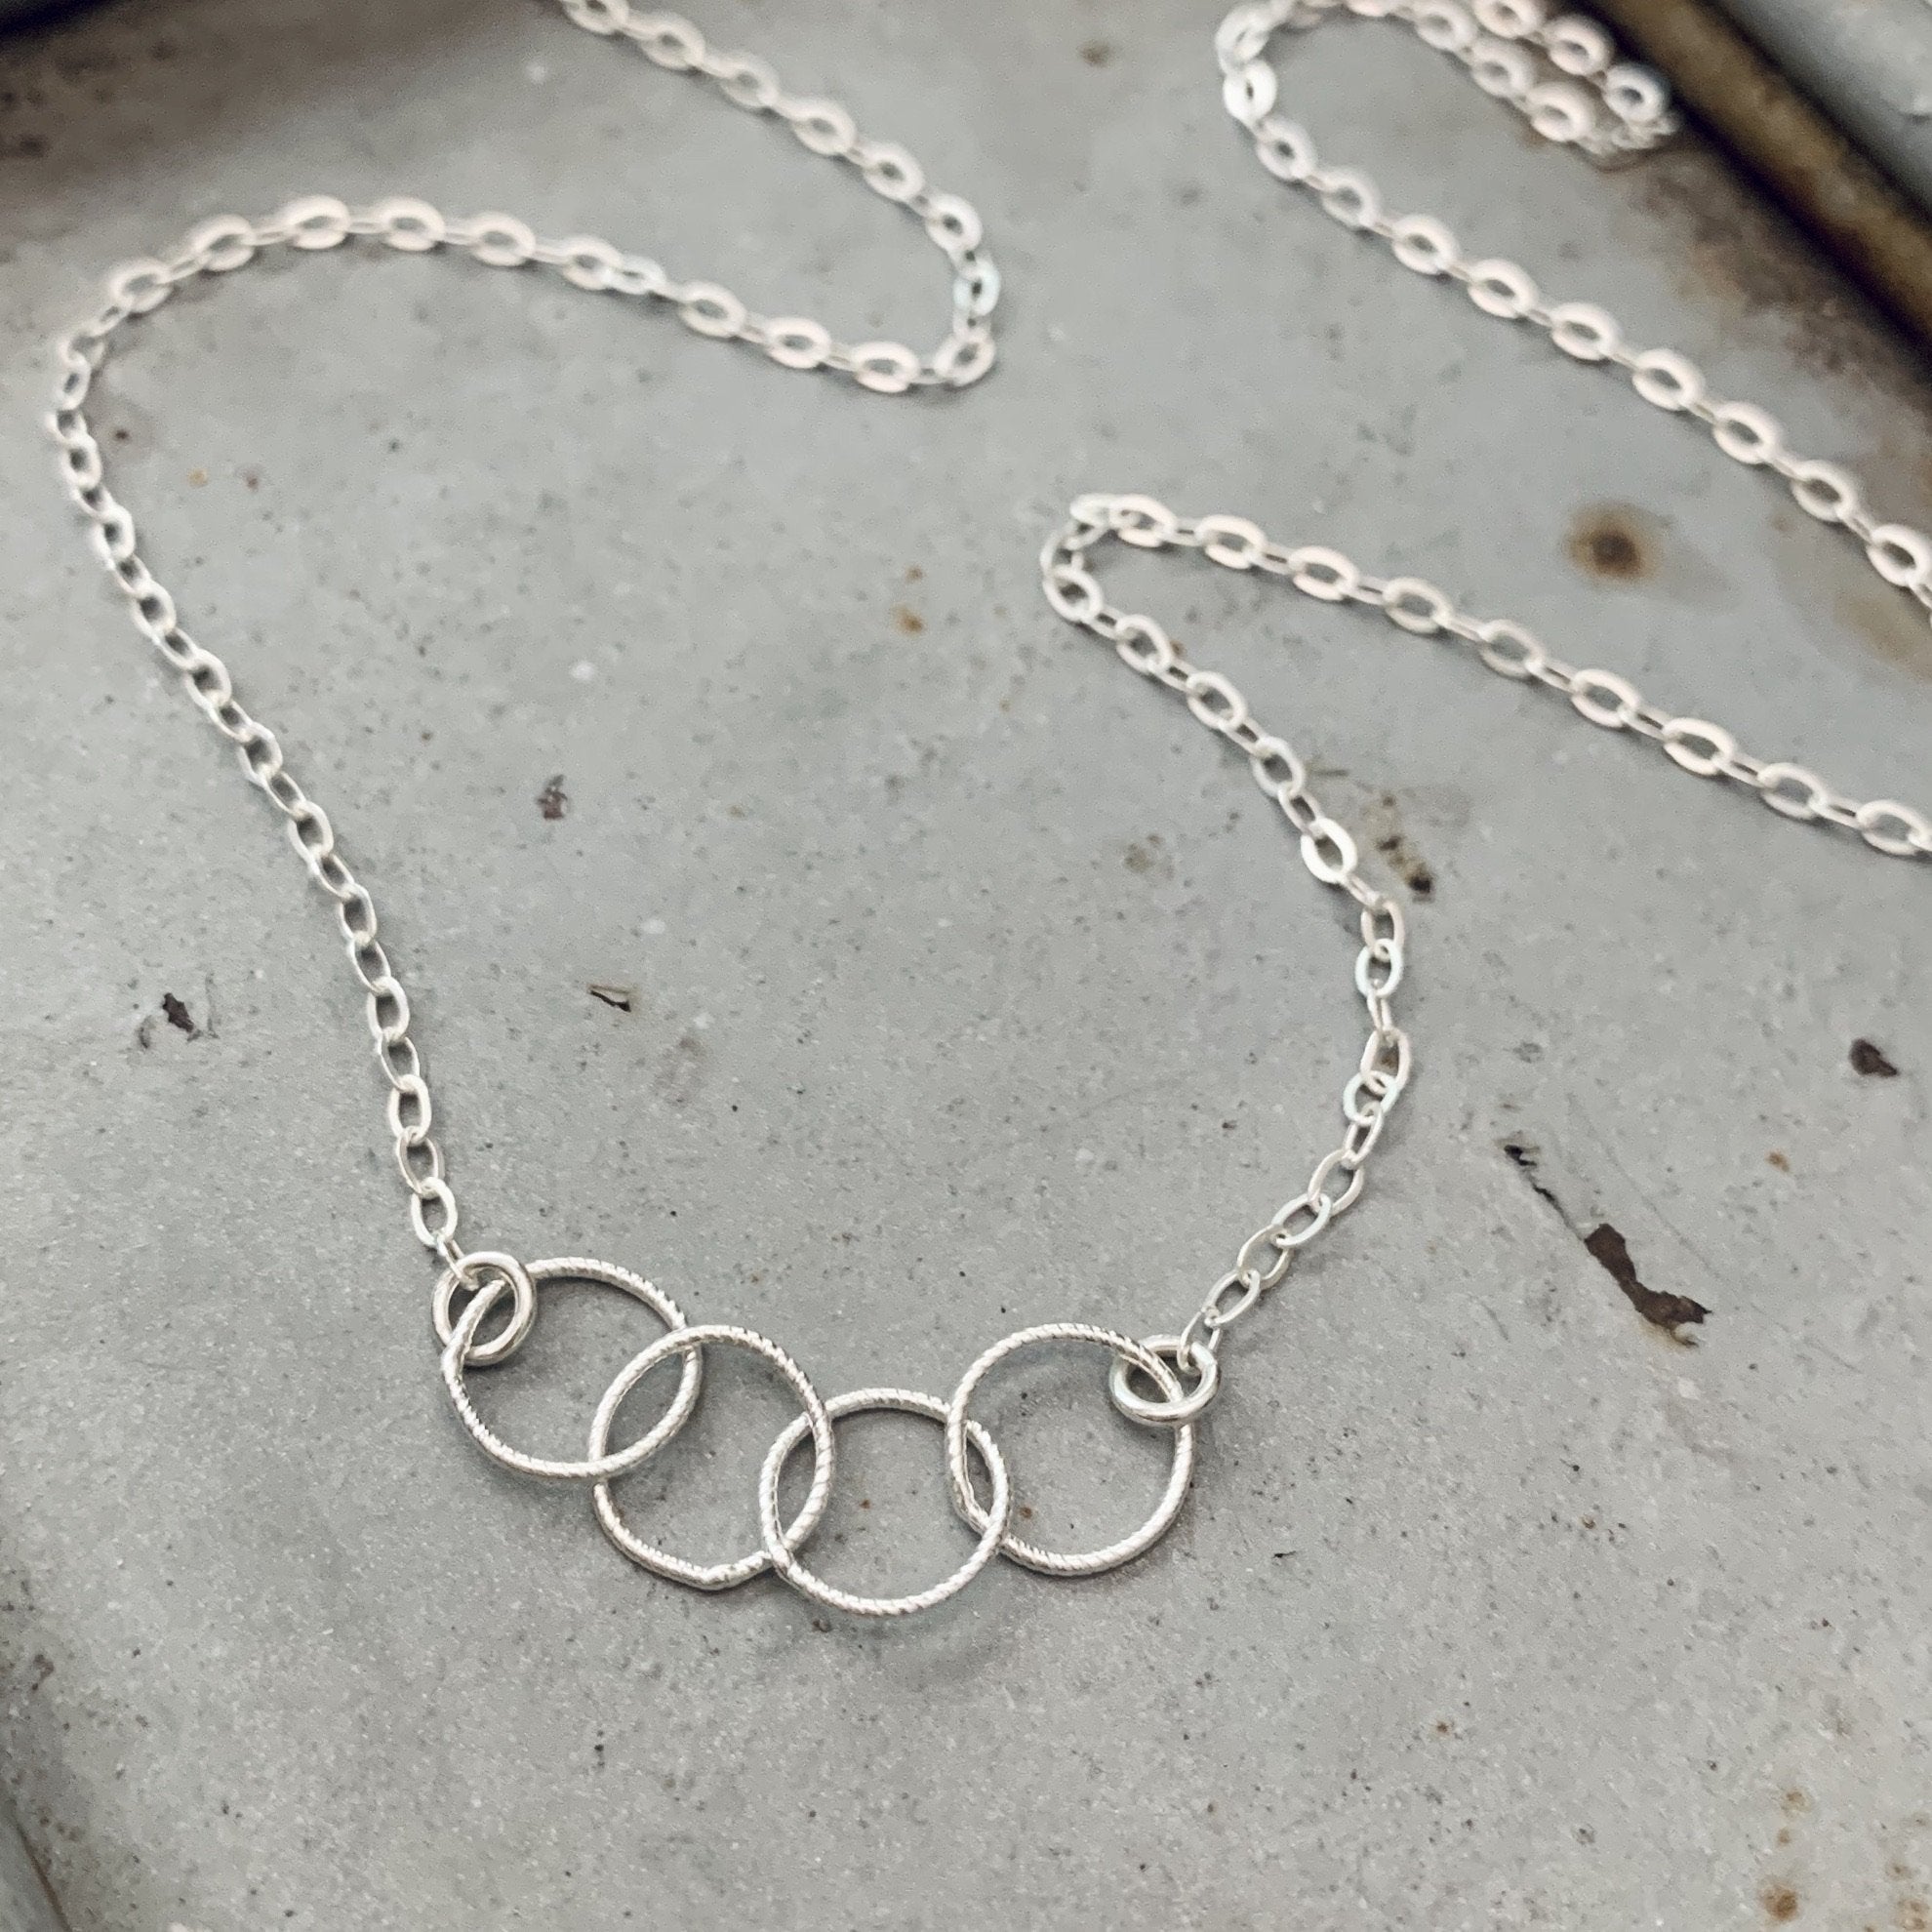 4 Circle Necklace in Sterling Silver, 4 Sisters, 4 Children, 4 Generations,  40th Birthday Gift for Her